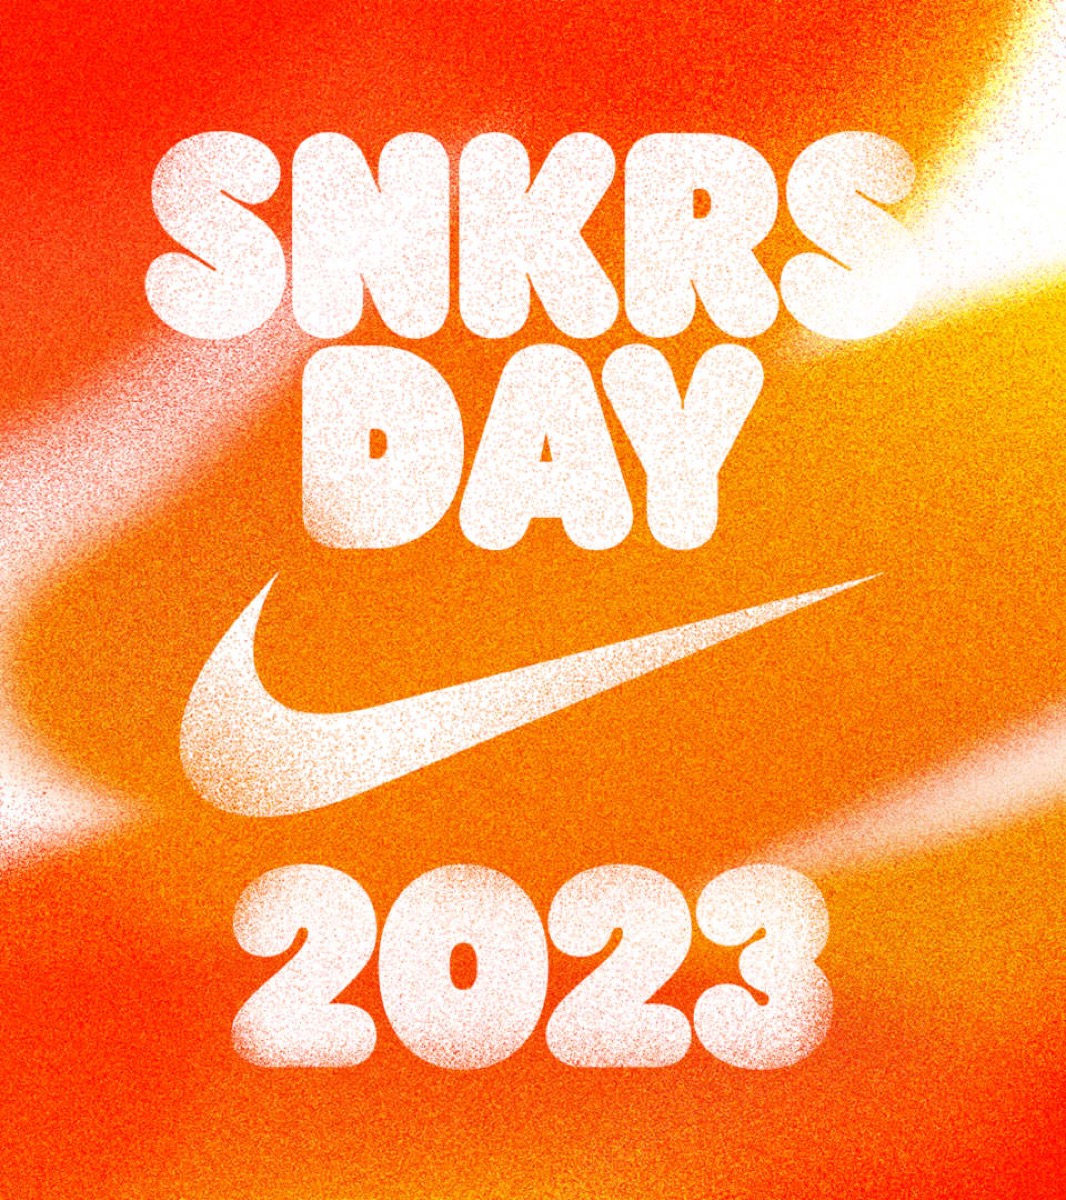 Nike】SNKRS Day イベントが国内9月6日から9月9日に開催 | UP TO DATE